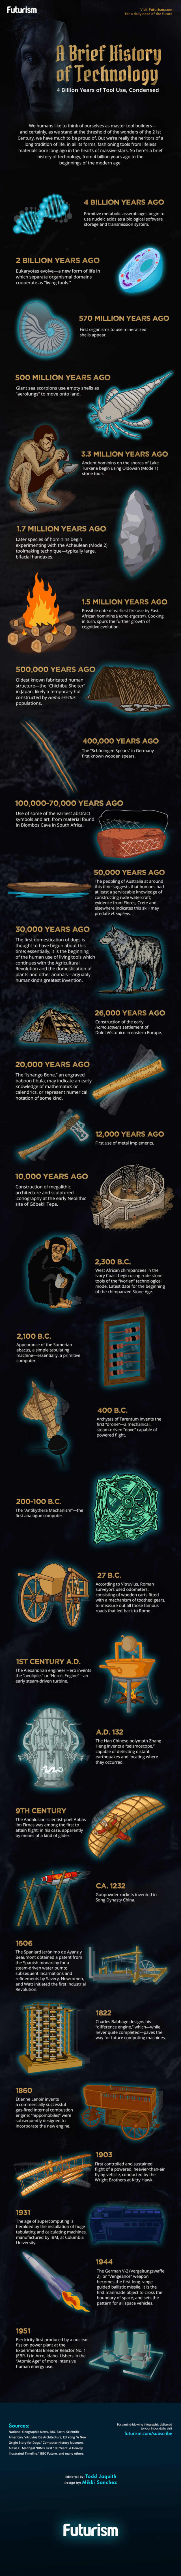 A Brief History of Technology infographic 2